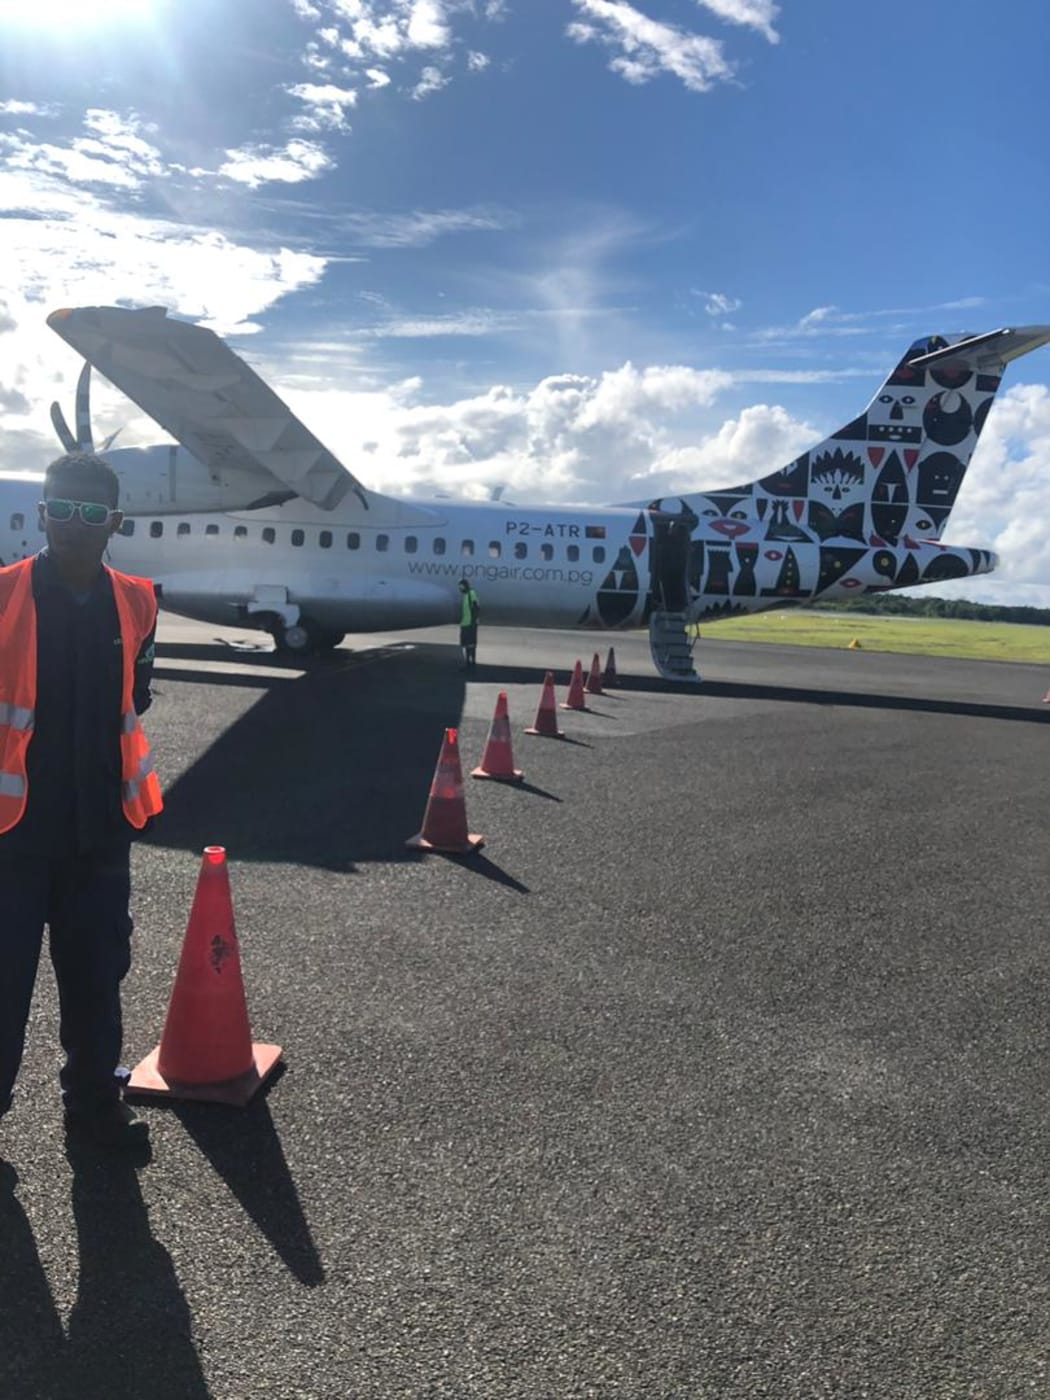 The plane used to transport the refugees to PNG.